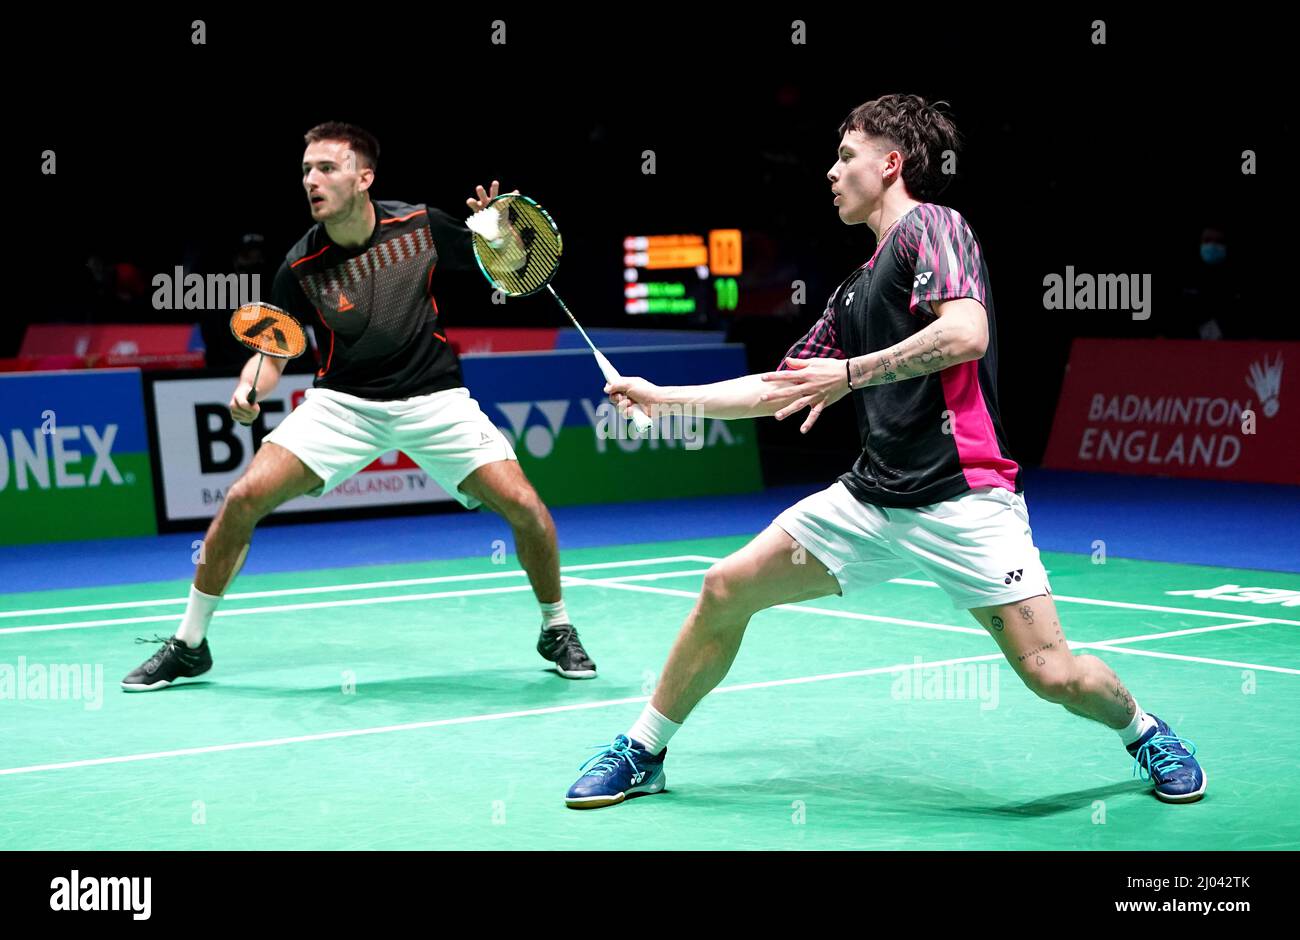 Englands Callum Hemming (right) and Steven Stallwood in action against Malaysias Teo Ee Yi and Ong Yew Sin during day one of the YONEX All England Open Badminton Championships at the Utilita